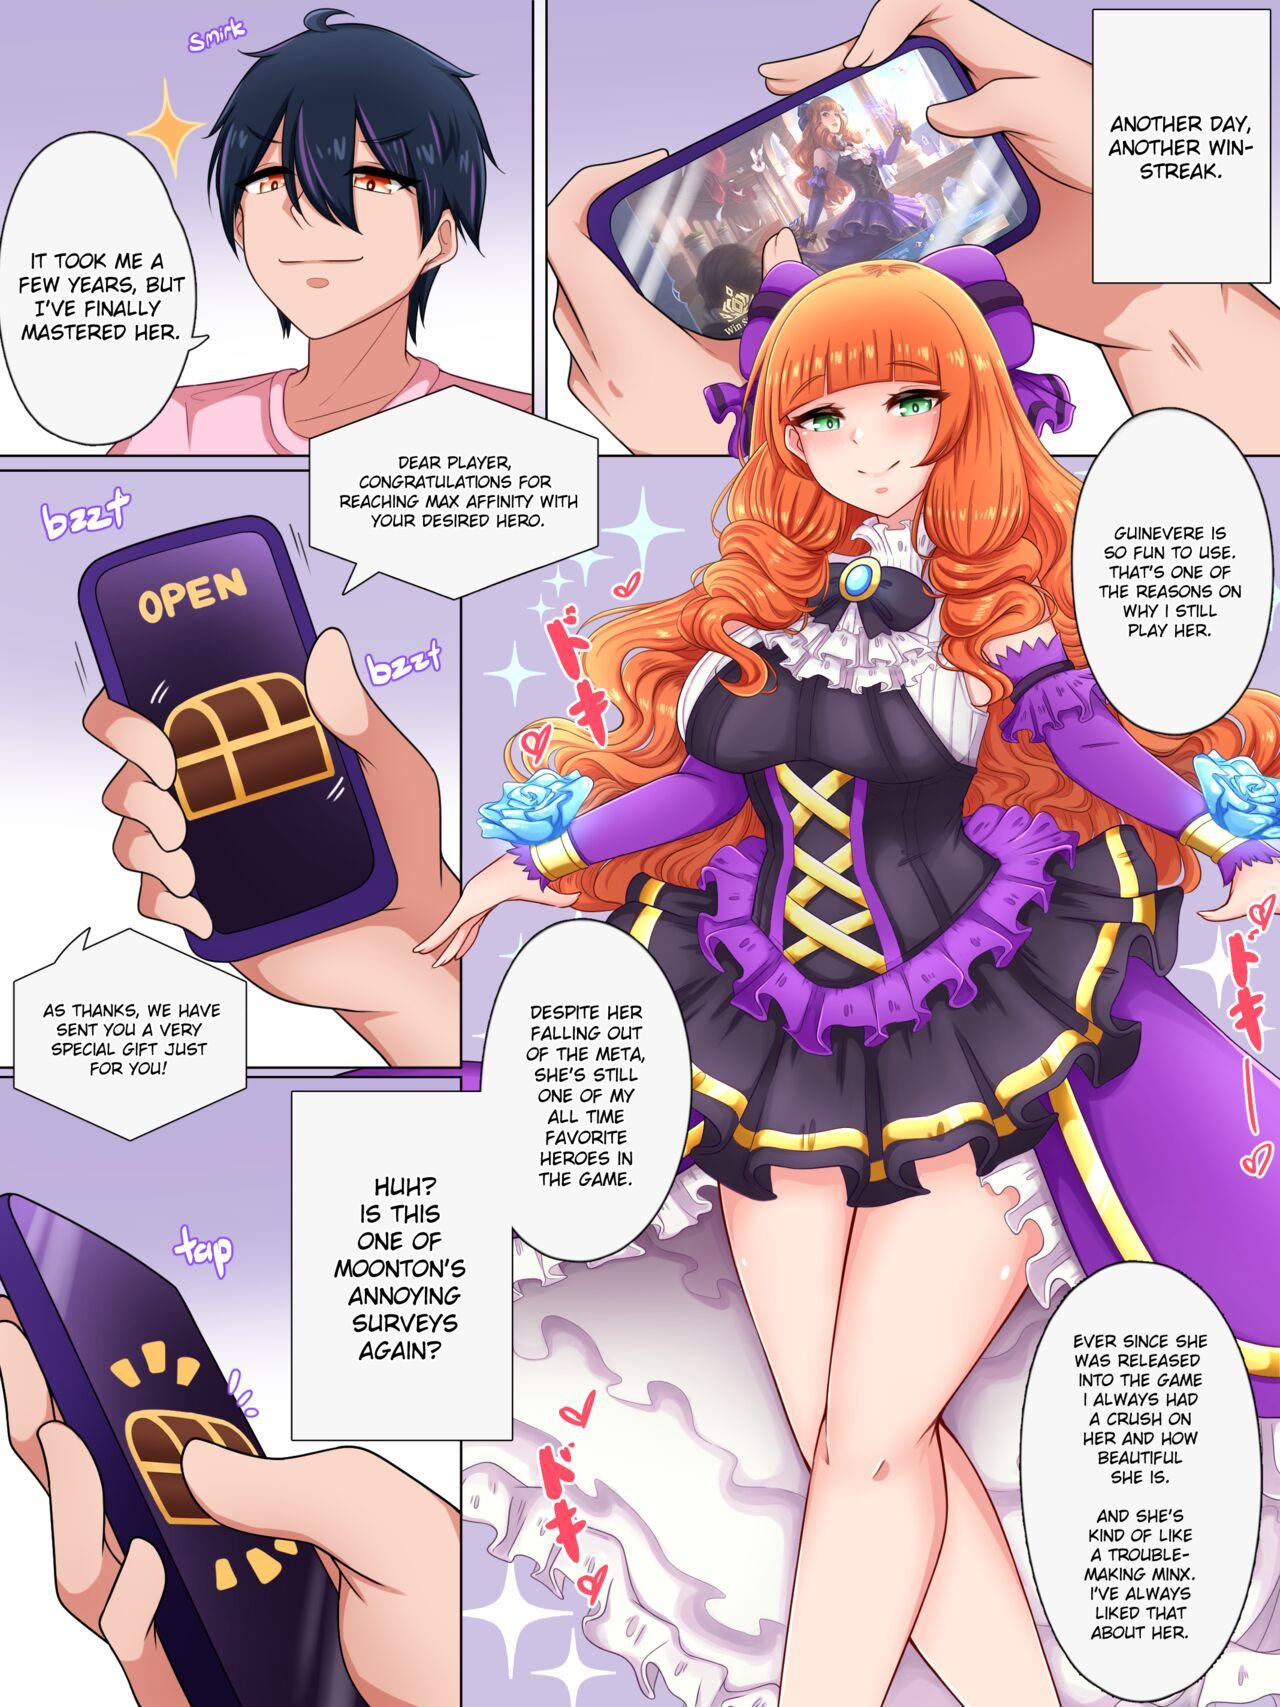 Xxx Shinwasei Guinevere | Affinity : Guinevere - Mobile legends bang bang Gagging - Page 2